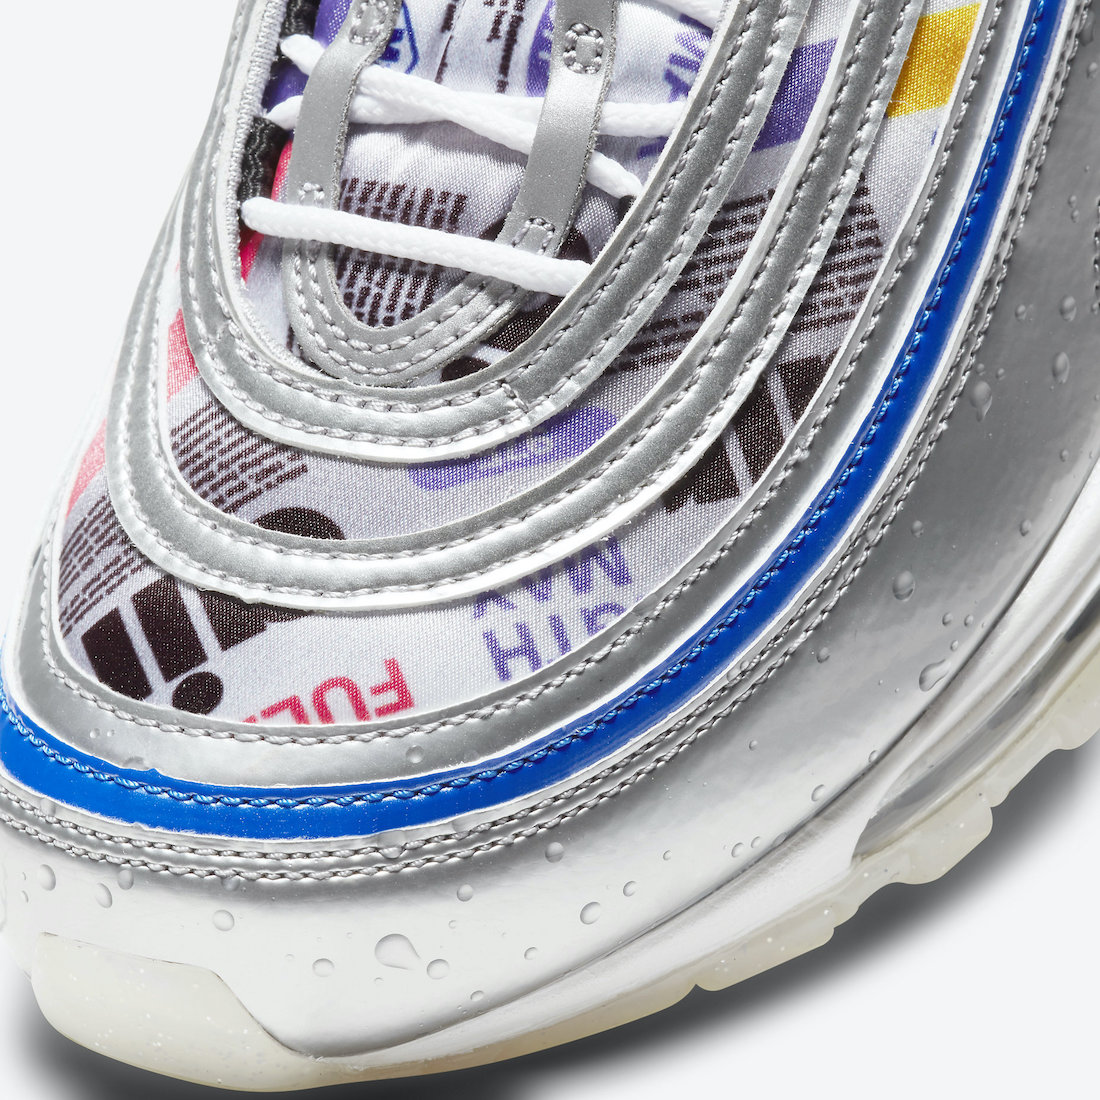 Nike-Air-Max-97-SE-Energy-Jelly-DD5480-902-Release-Date-6